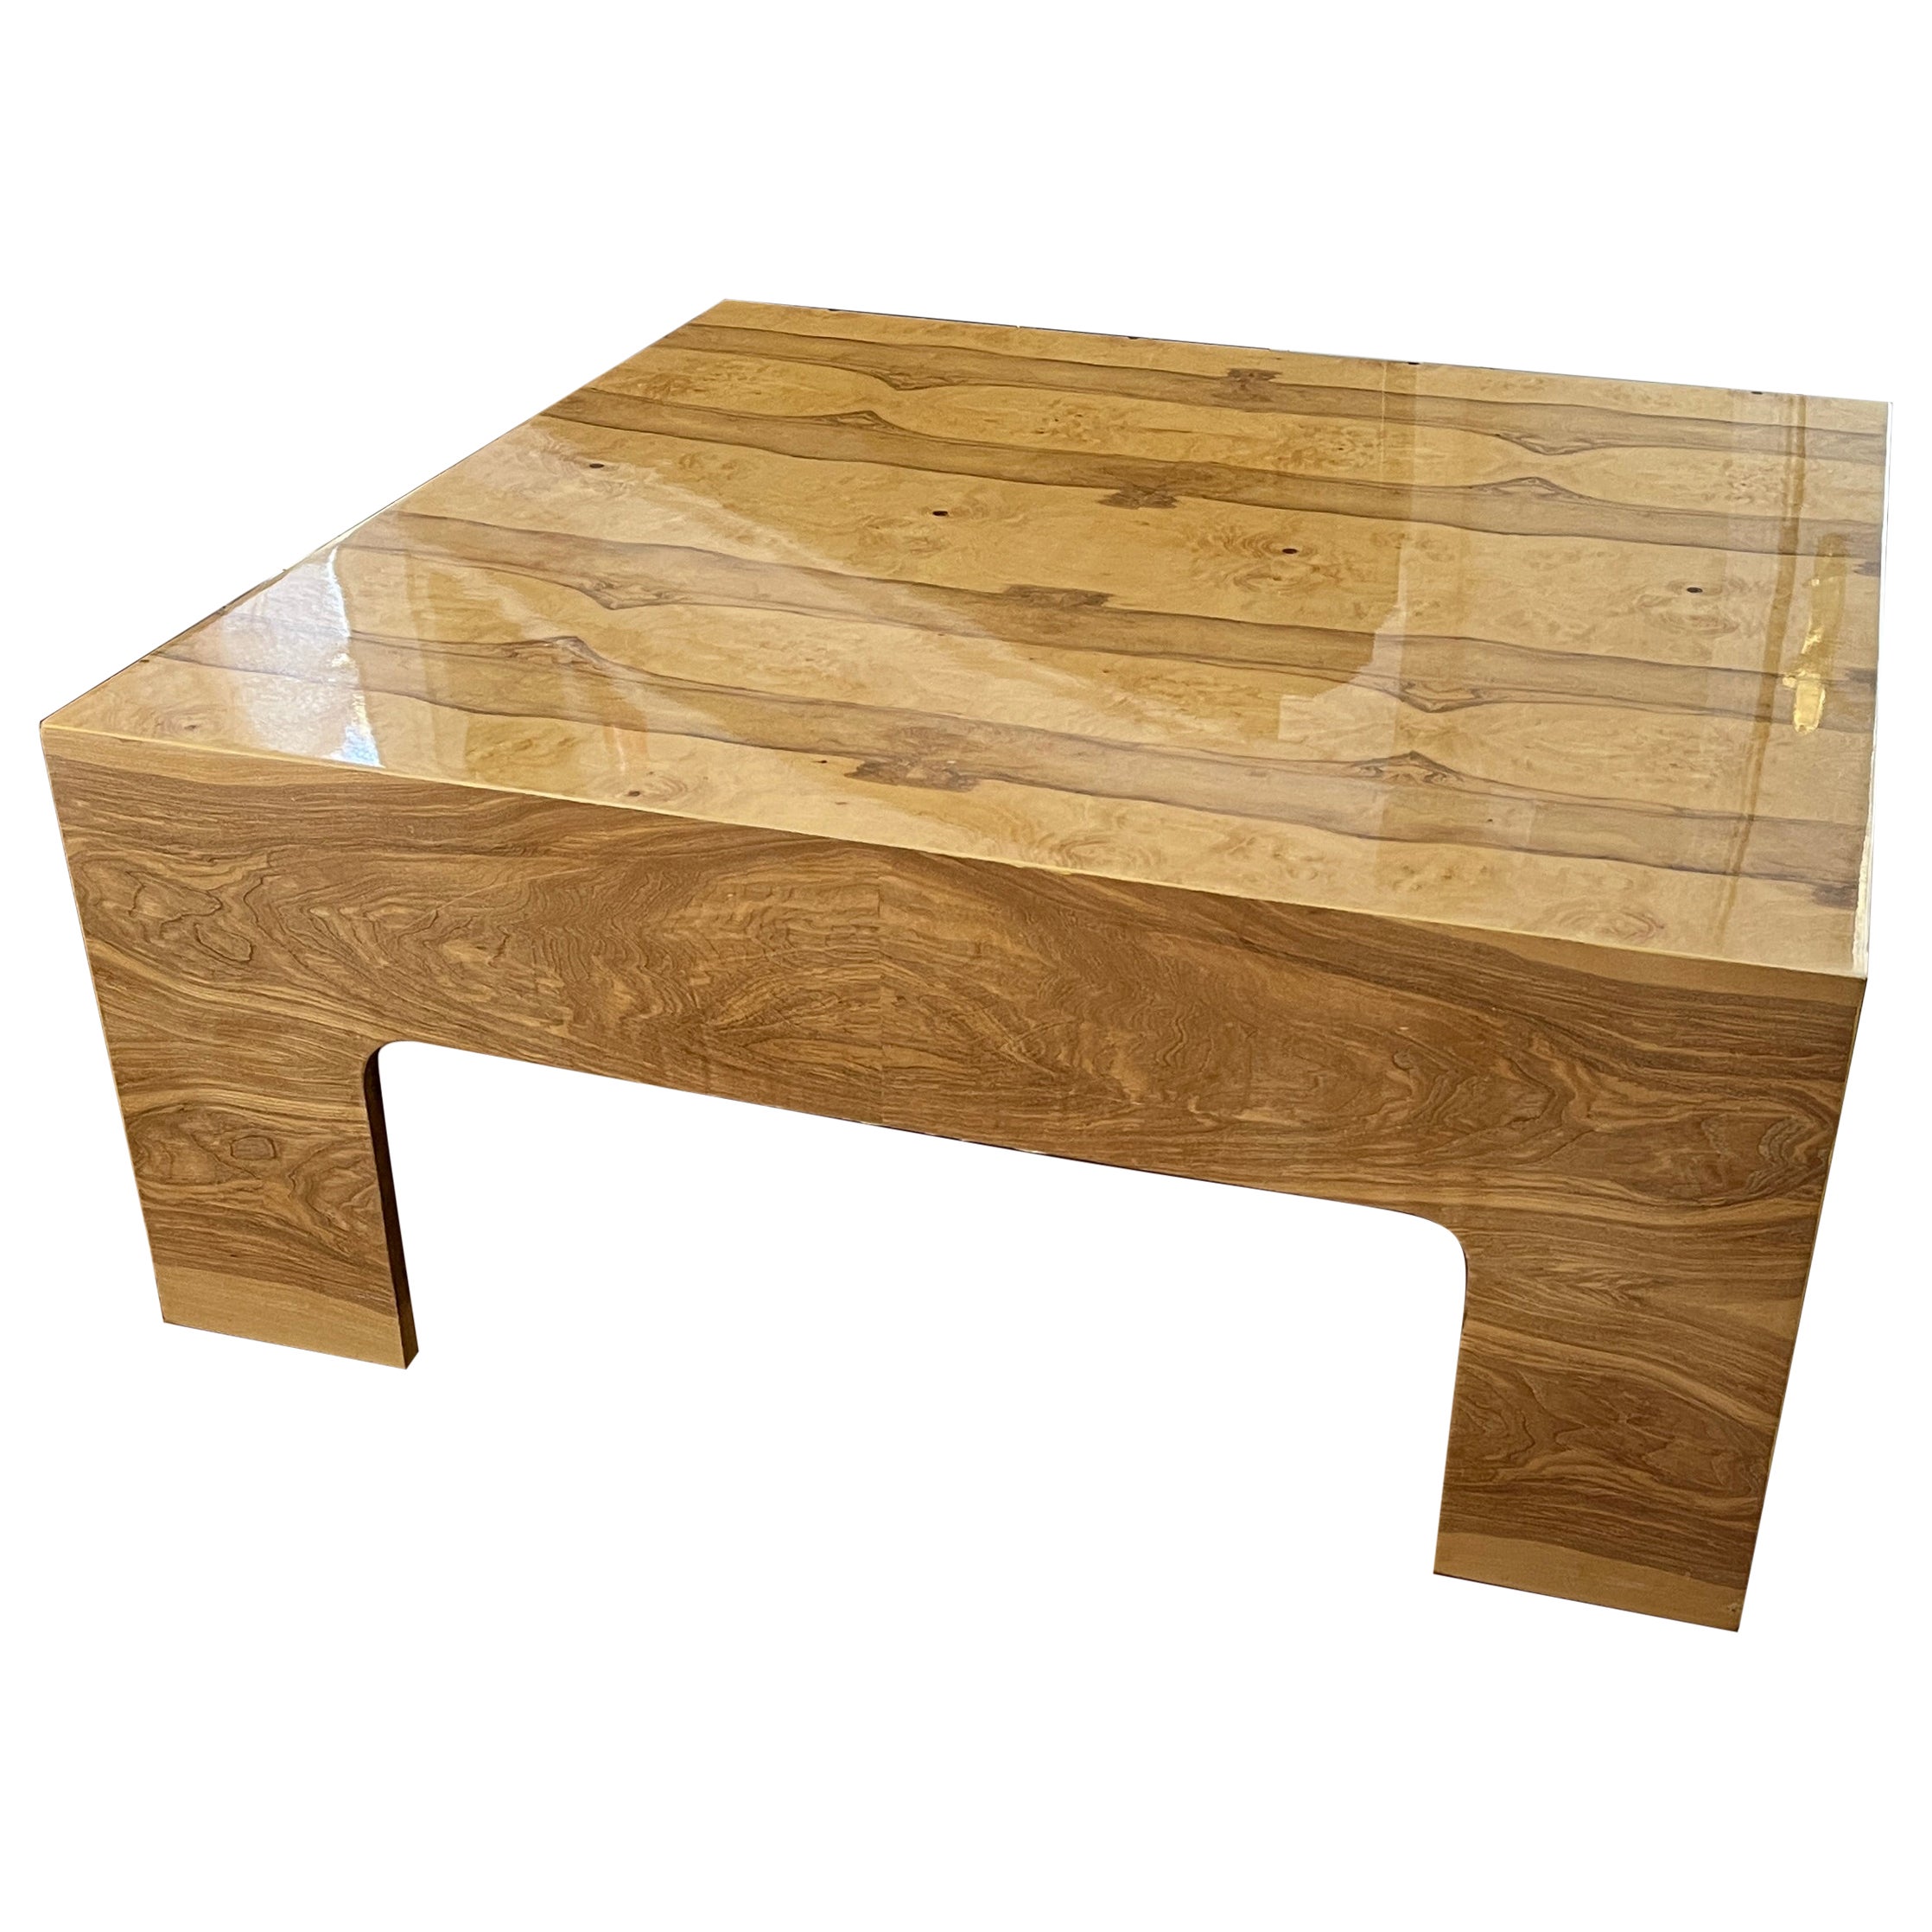 Olive Burl Wood Parsons Coffee Table in the Style of Milo Baughman